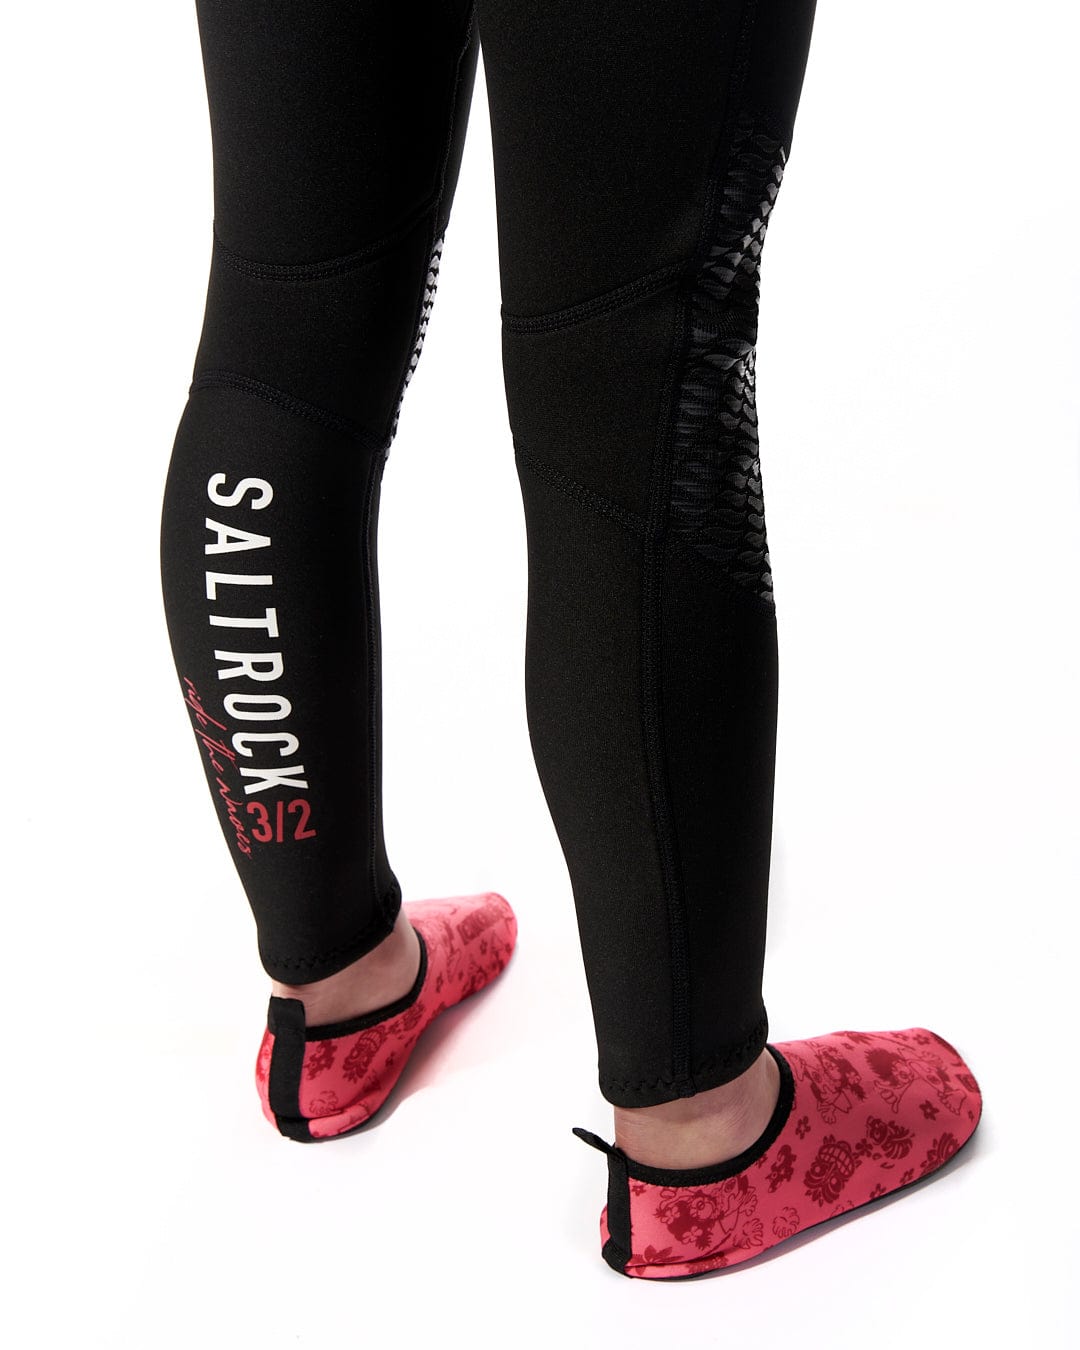 A woman wearing a pair of black and red Saltrock Core - Kids 3/2 Full Wetsuits.